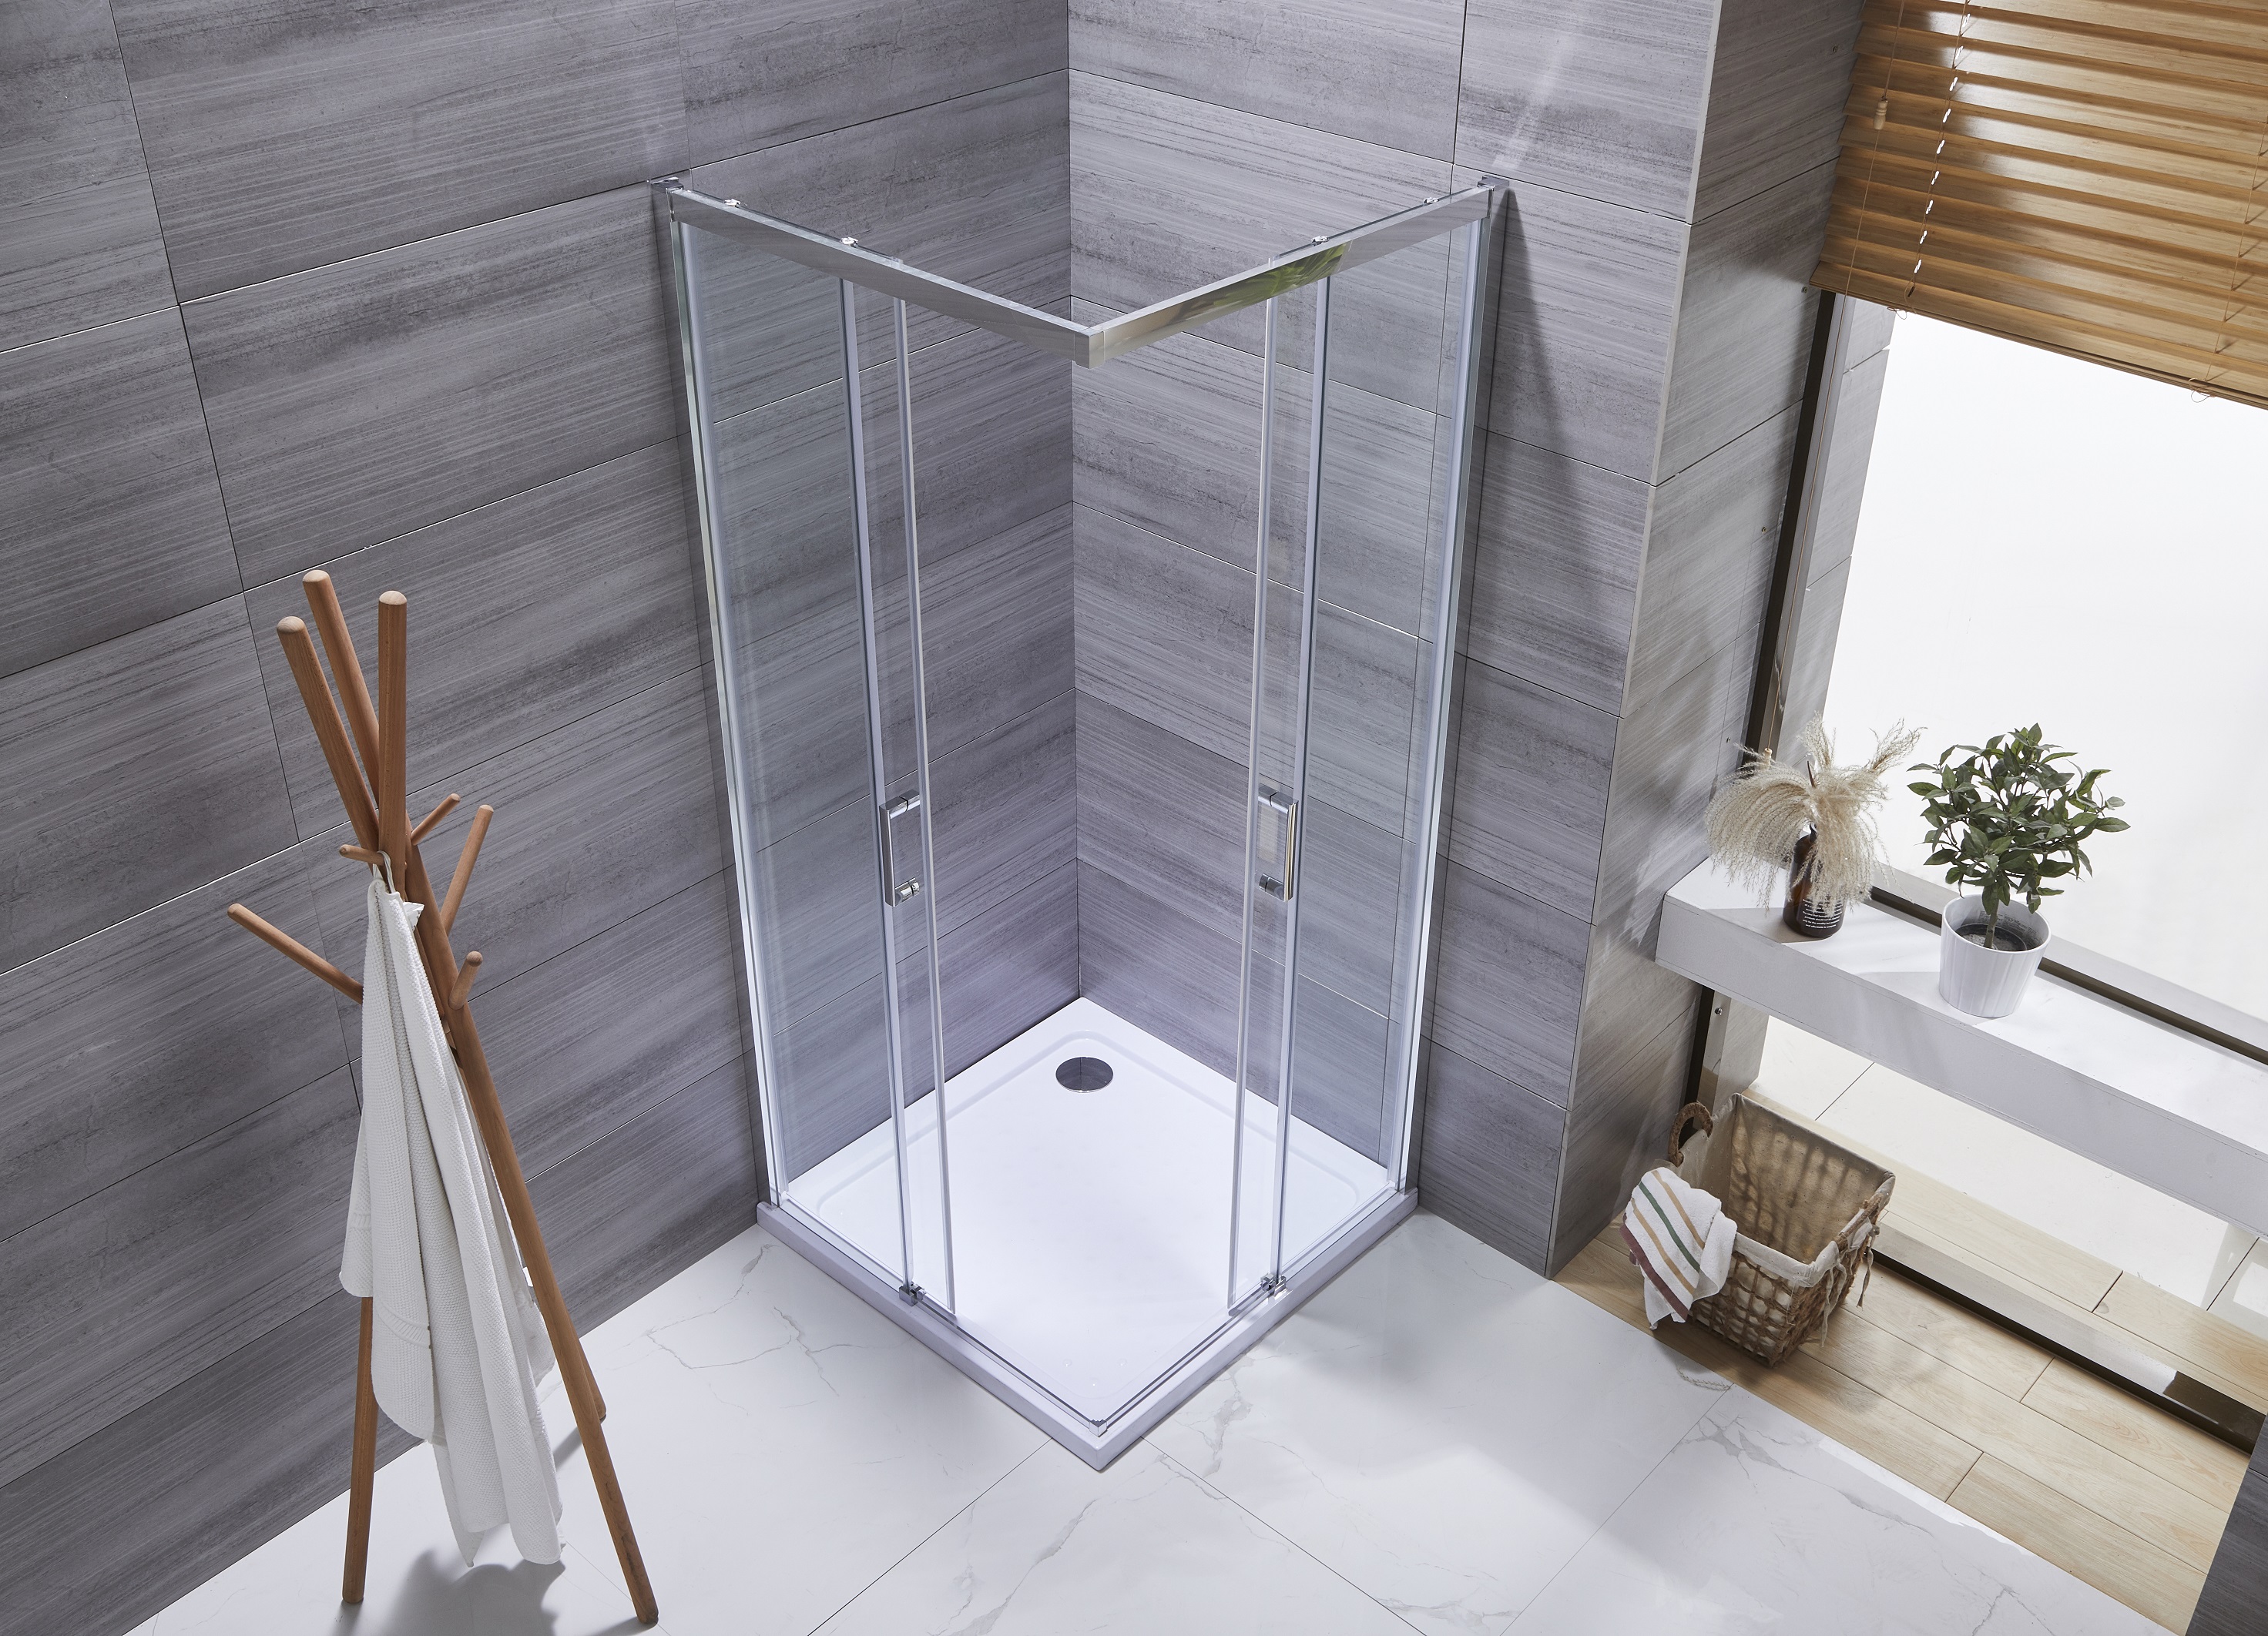 2020 New Bathroom Shower Panels Walk in Door Style Transparency Clearly Glass with Chrome Aluminum Frame